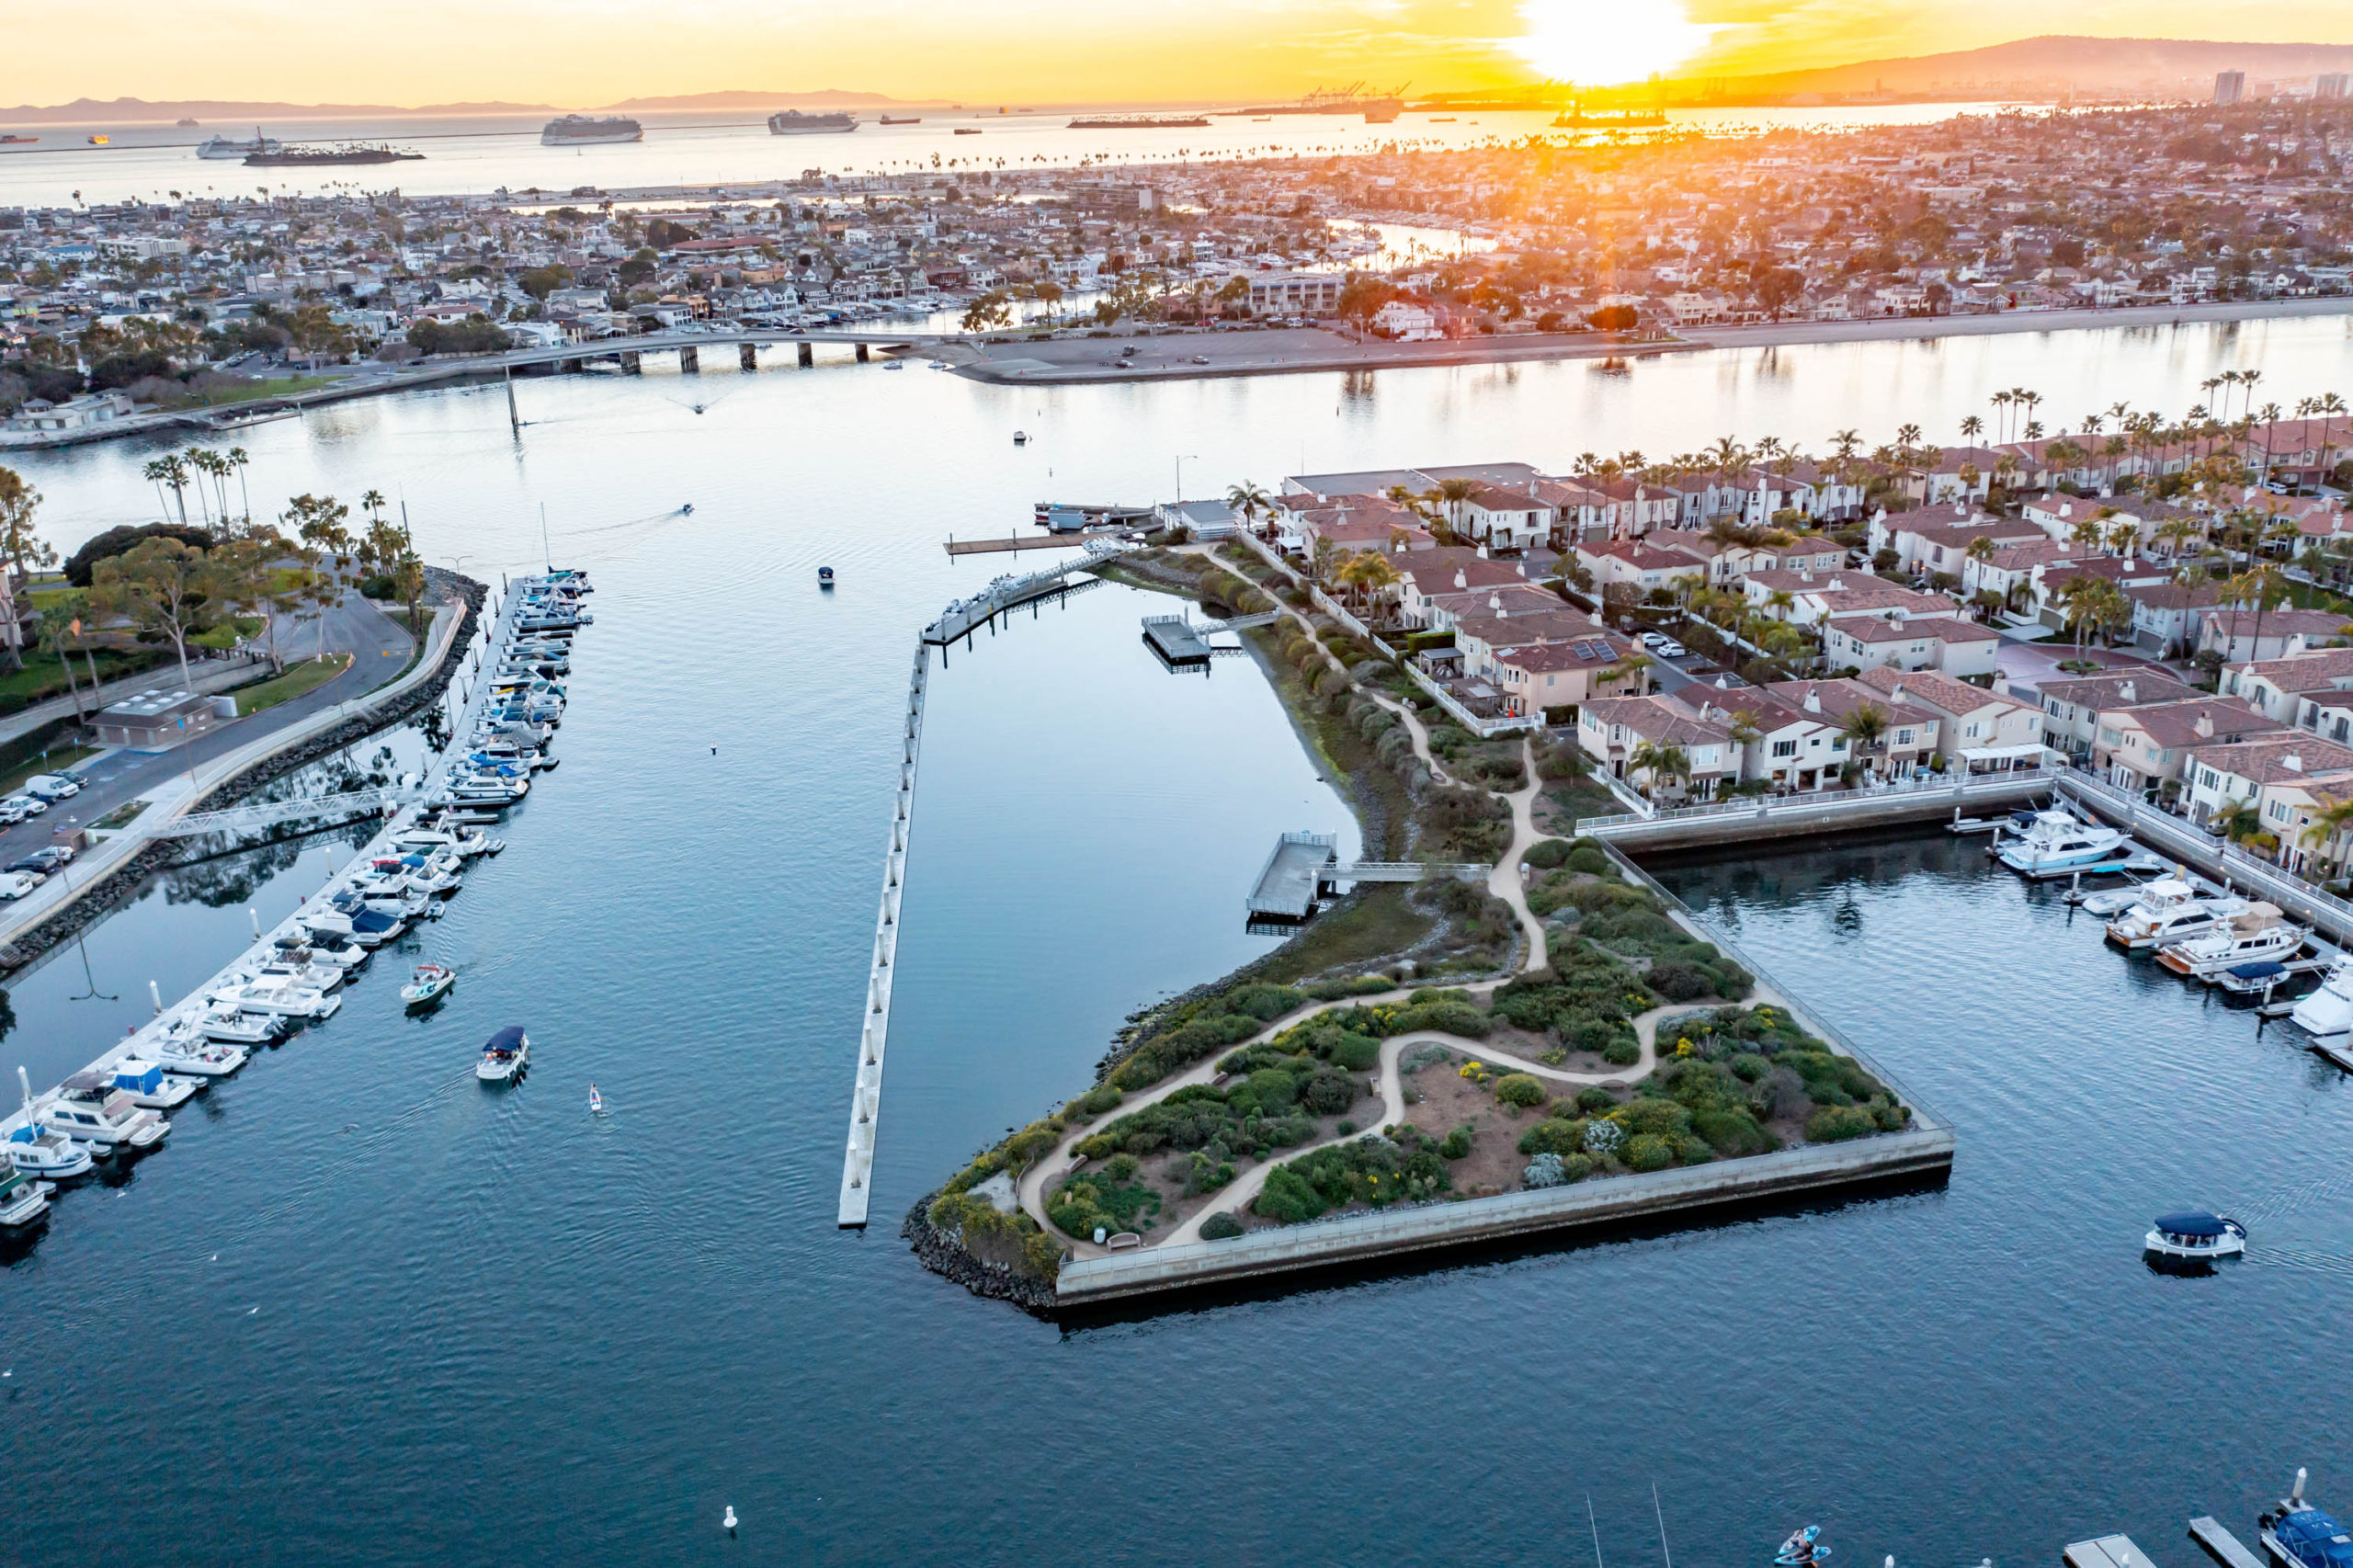 drone photo of Los Alamitos bay from high above at sunset